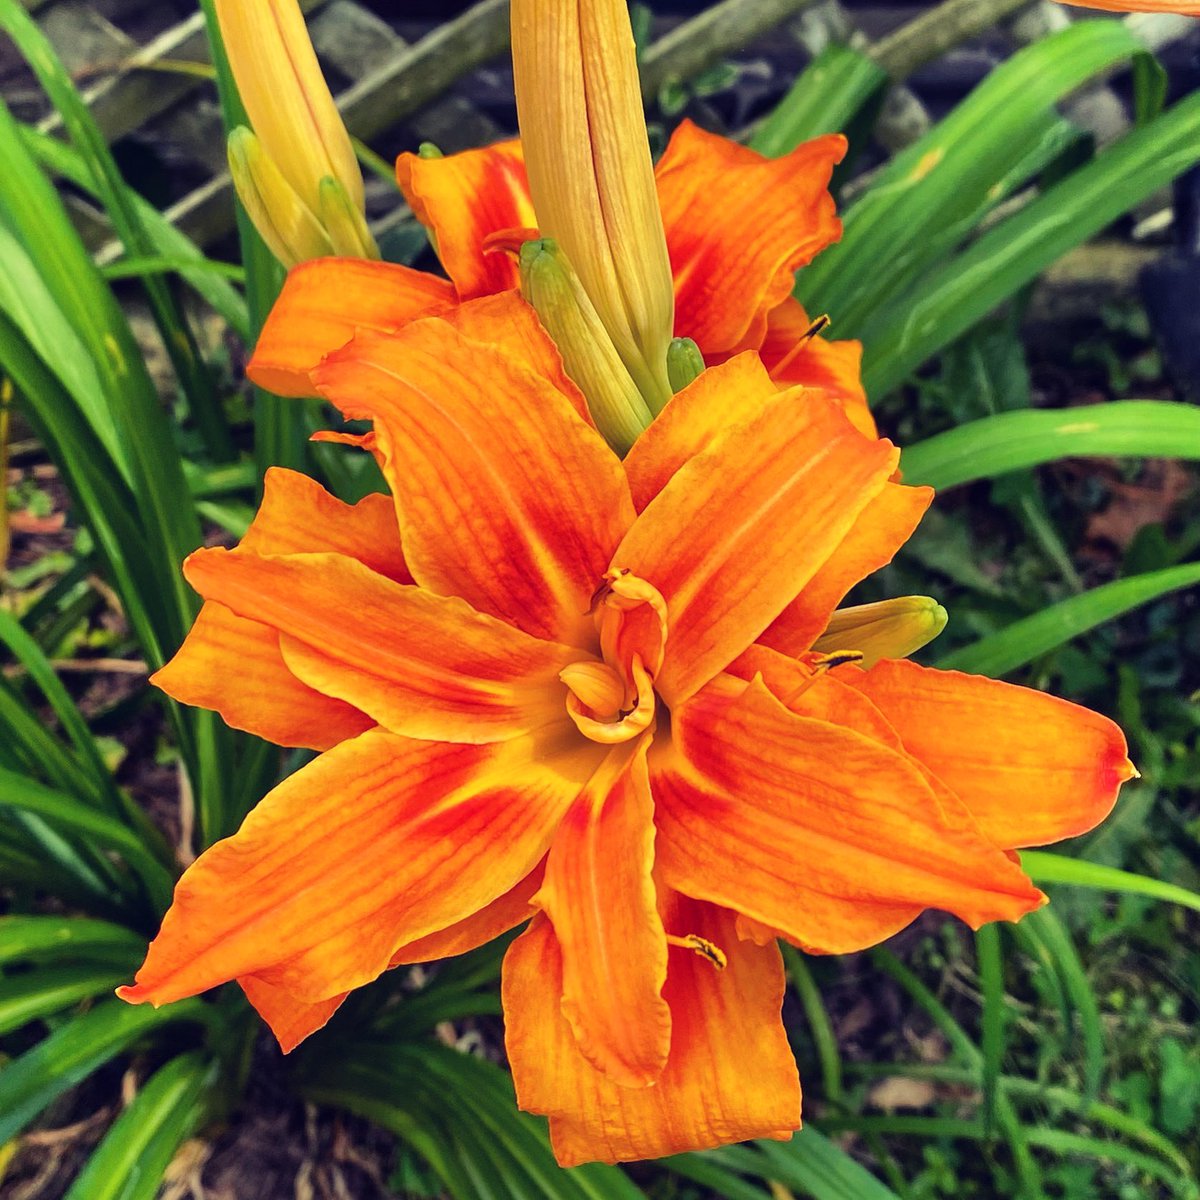 Good morning🧡 #RTITBOT #FlowersOnFriday #flowers #FunFactFriday 2 years ago I thought the soil on the side of the house smelled kinda sour, so I decided to freshen up with baking soda, and now all the tiger lilies over there have double blooms. PH change I guess? Let me know.